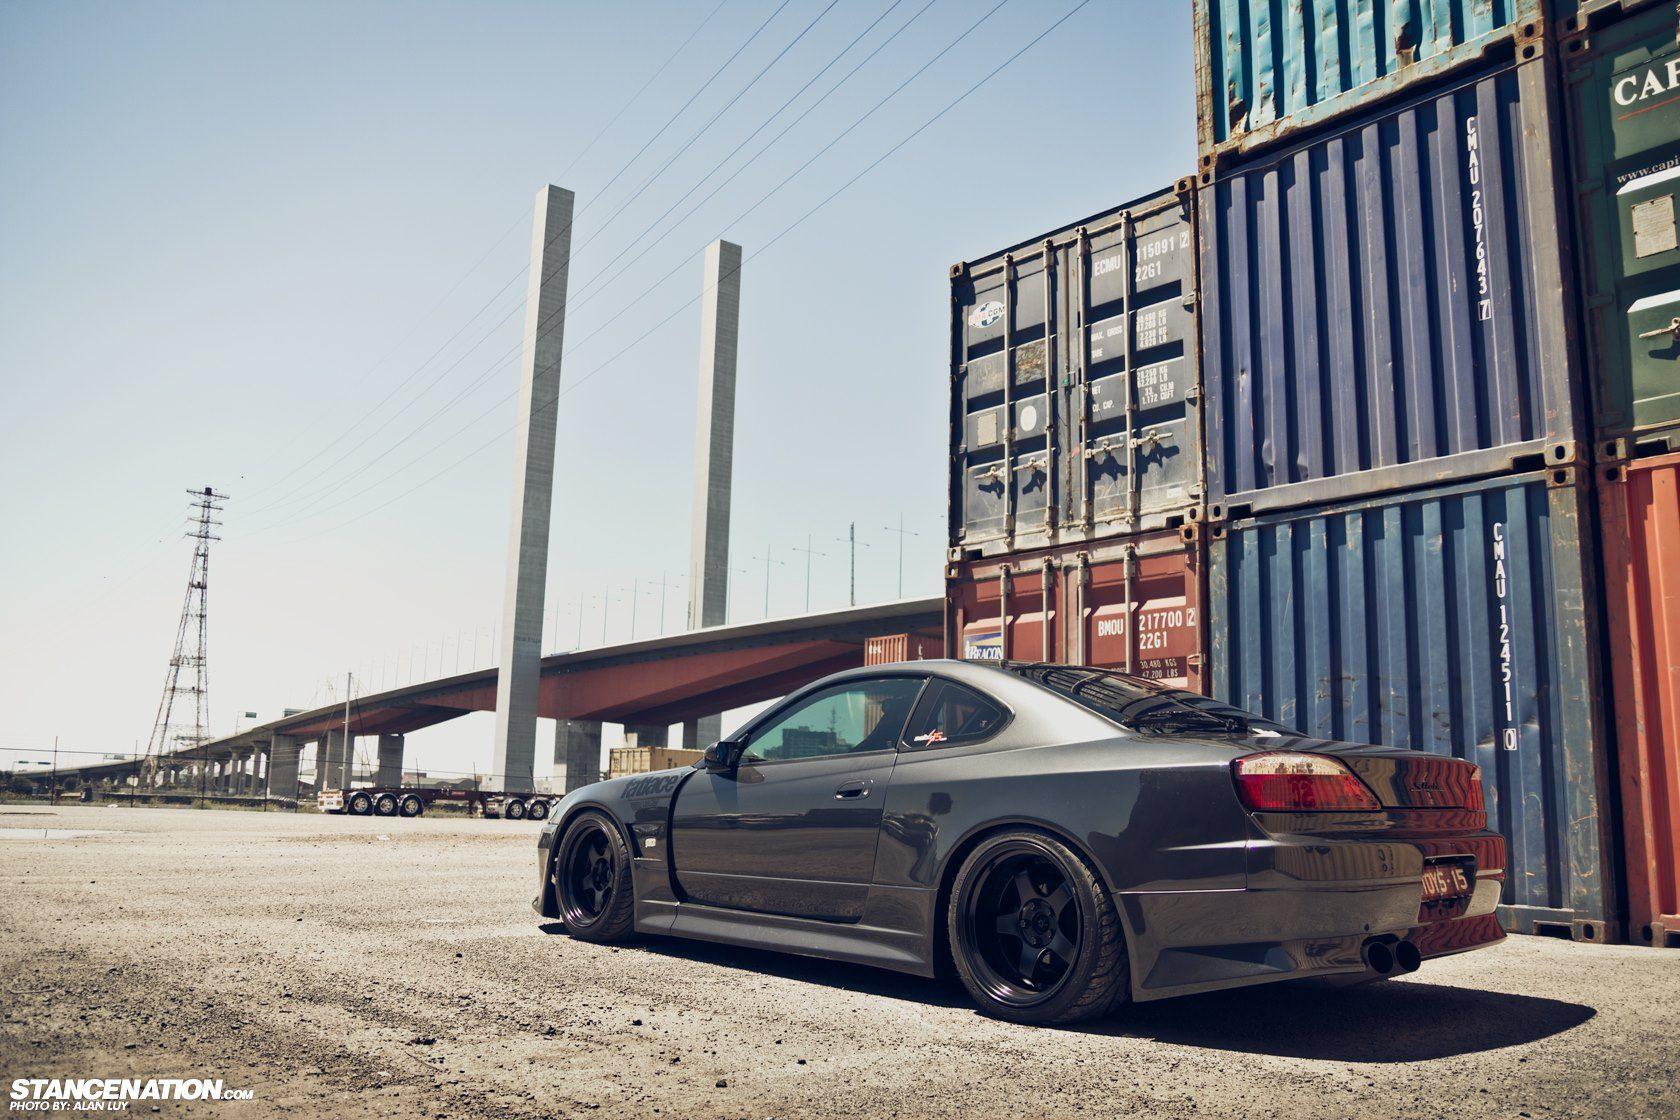 Stance image Nissan Silvia S15 HD wallpaper and background photo